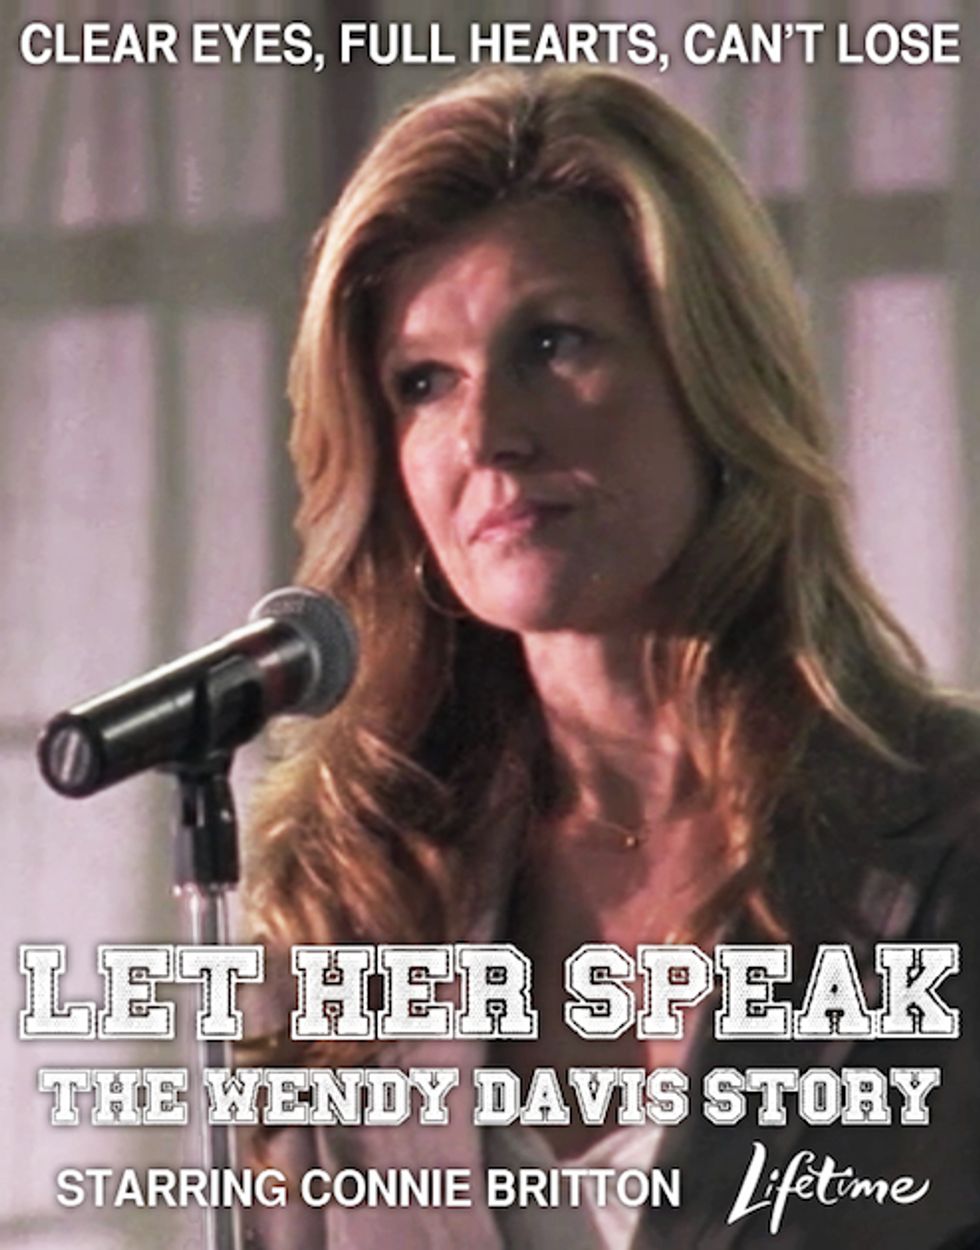 We Will Donate All The Monies To Wendy Davis If We Can Touch Connie Britton's Hair